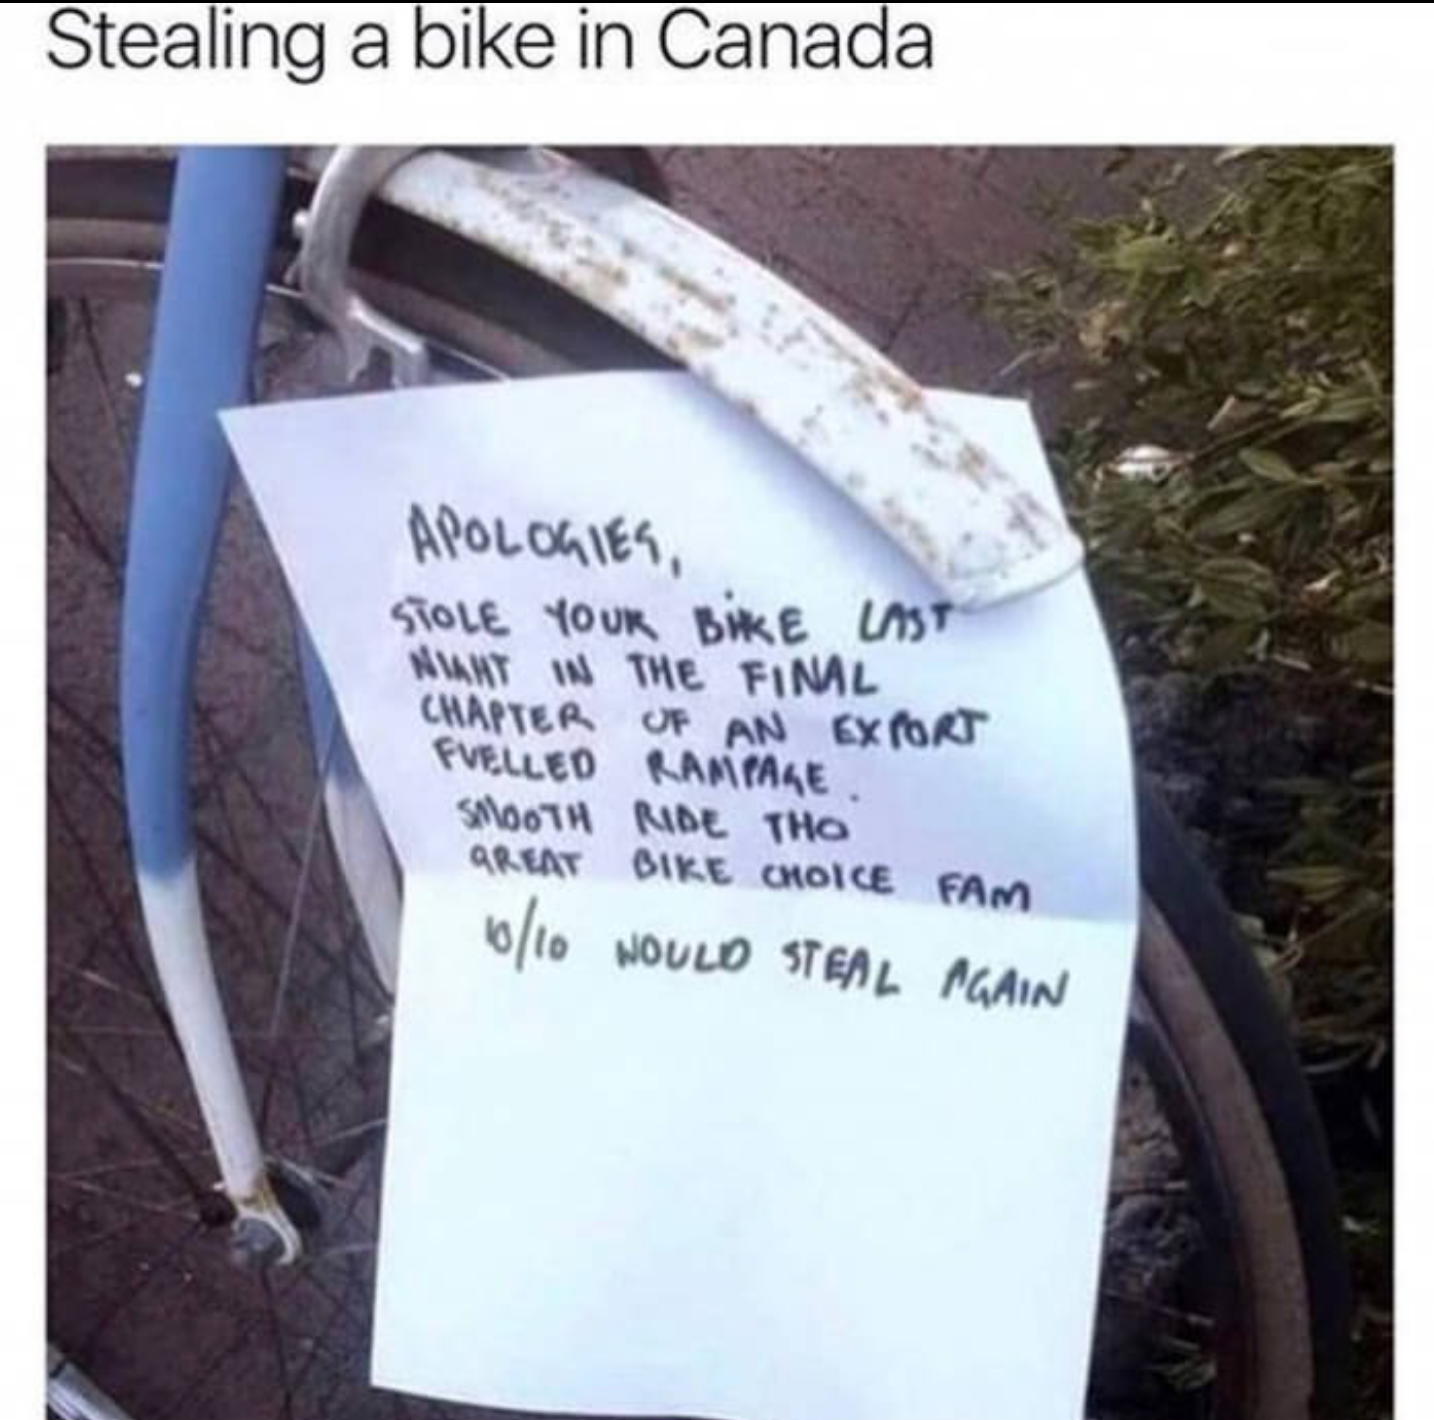 stealing a bike in canada - Stealing a bike in Canada Apologies, Stole Your Bik E Last Smart 4 The Finl Chapter Of An Export Fvelled Rampage Sooth Ride Tho Arut Bike Choice Fam 010 Noulo Steal Mgain